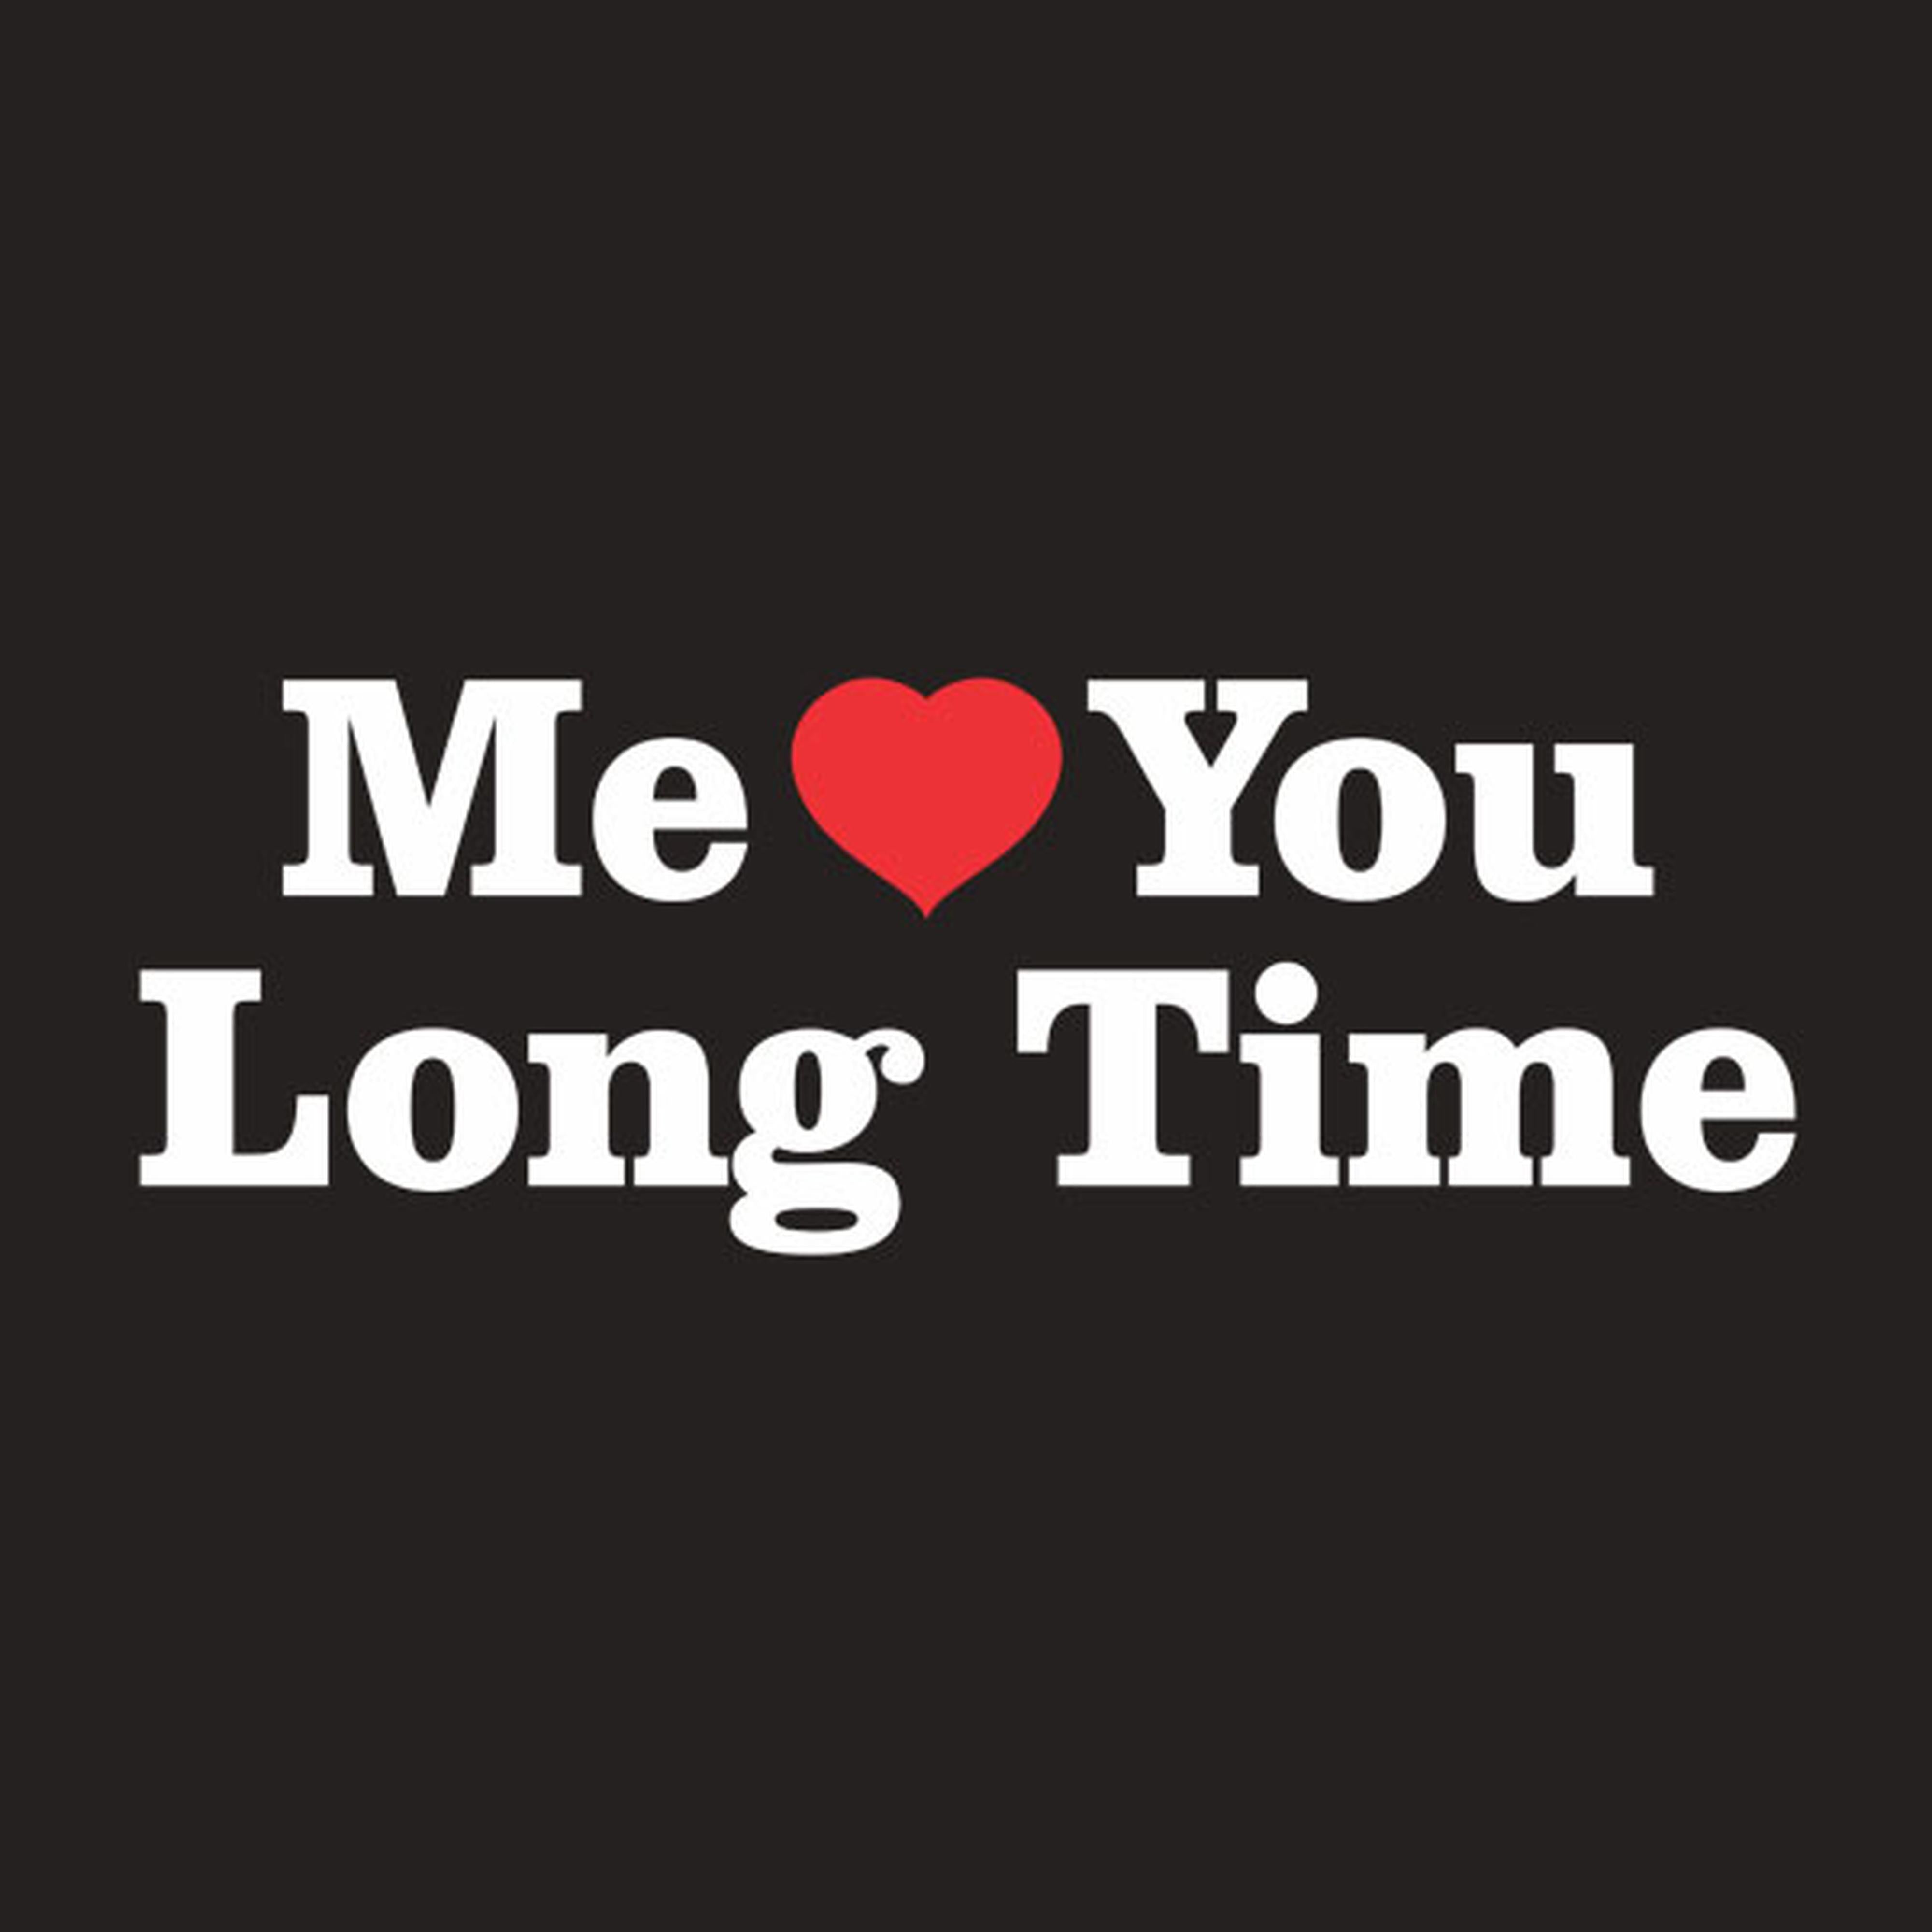 Me love you long time